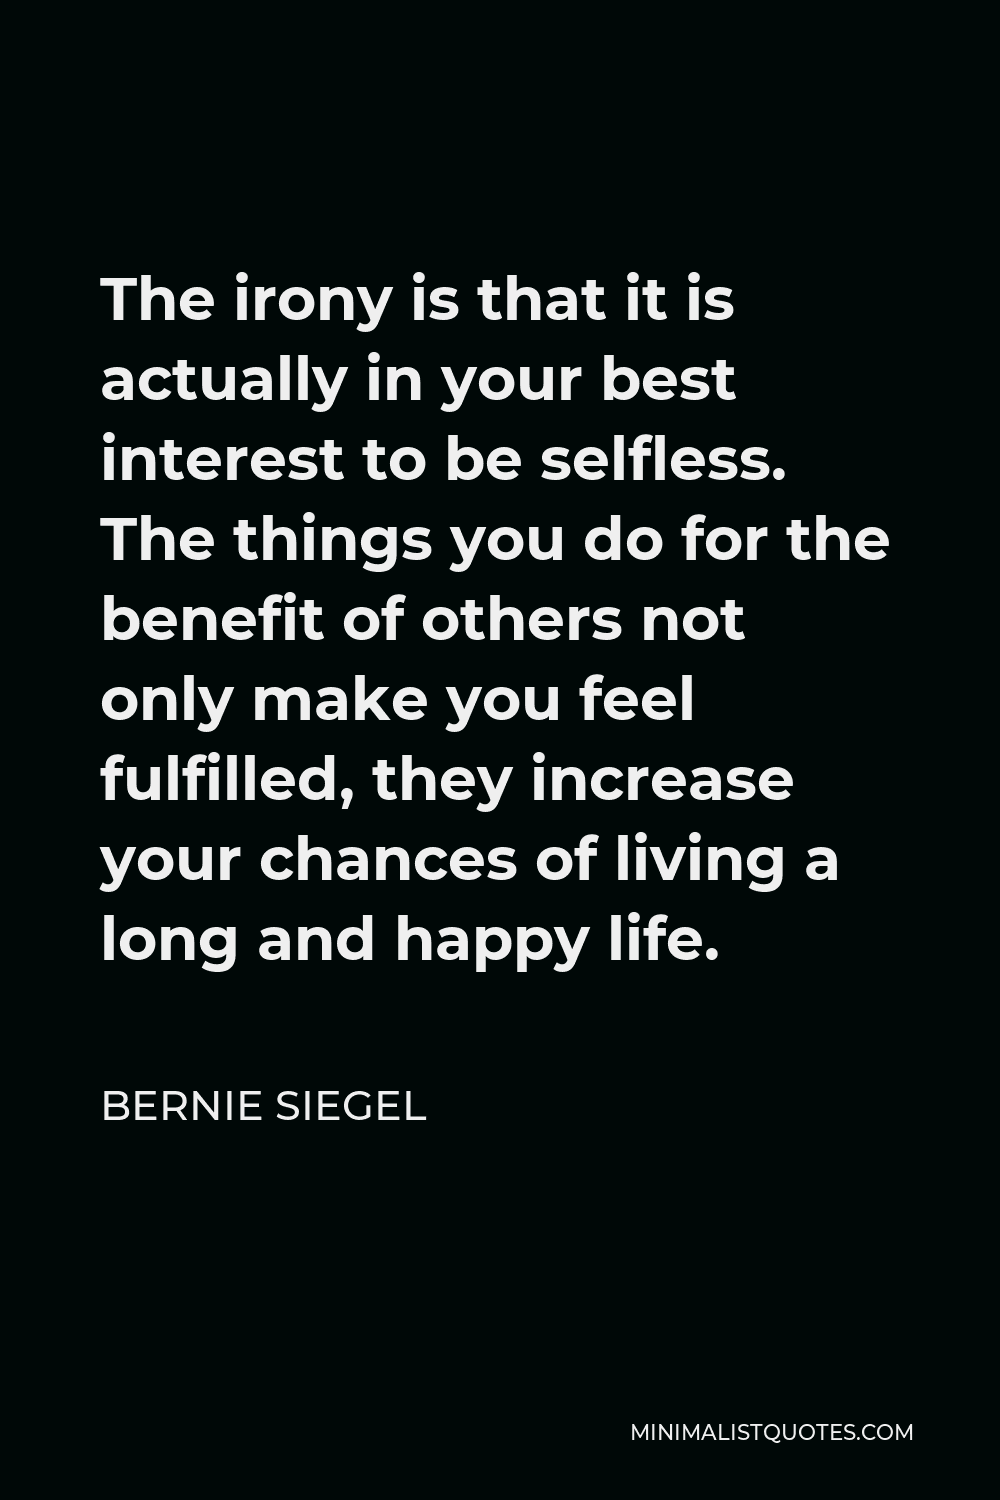 Bernie Siegel Quote - The irony is that it is actually in your best interest to be selfless. The things you do for the benefit of others not only make you feel fulfilled, they increase your chances of living a long and happy life.